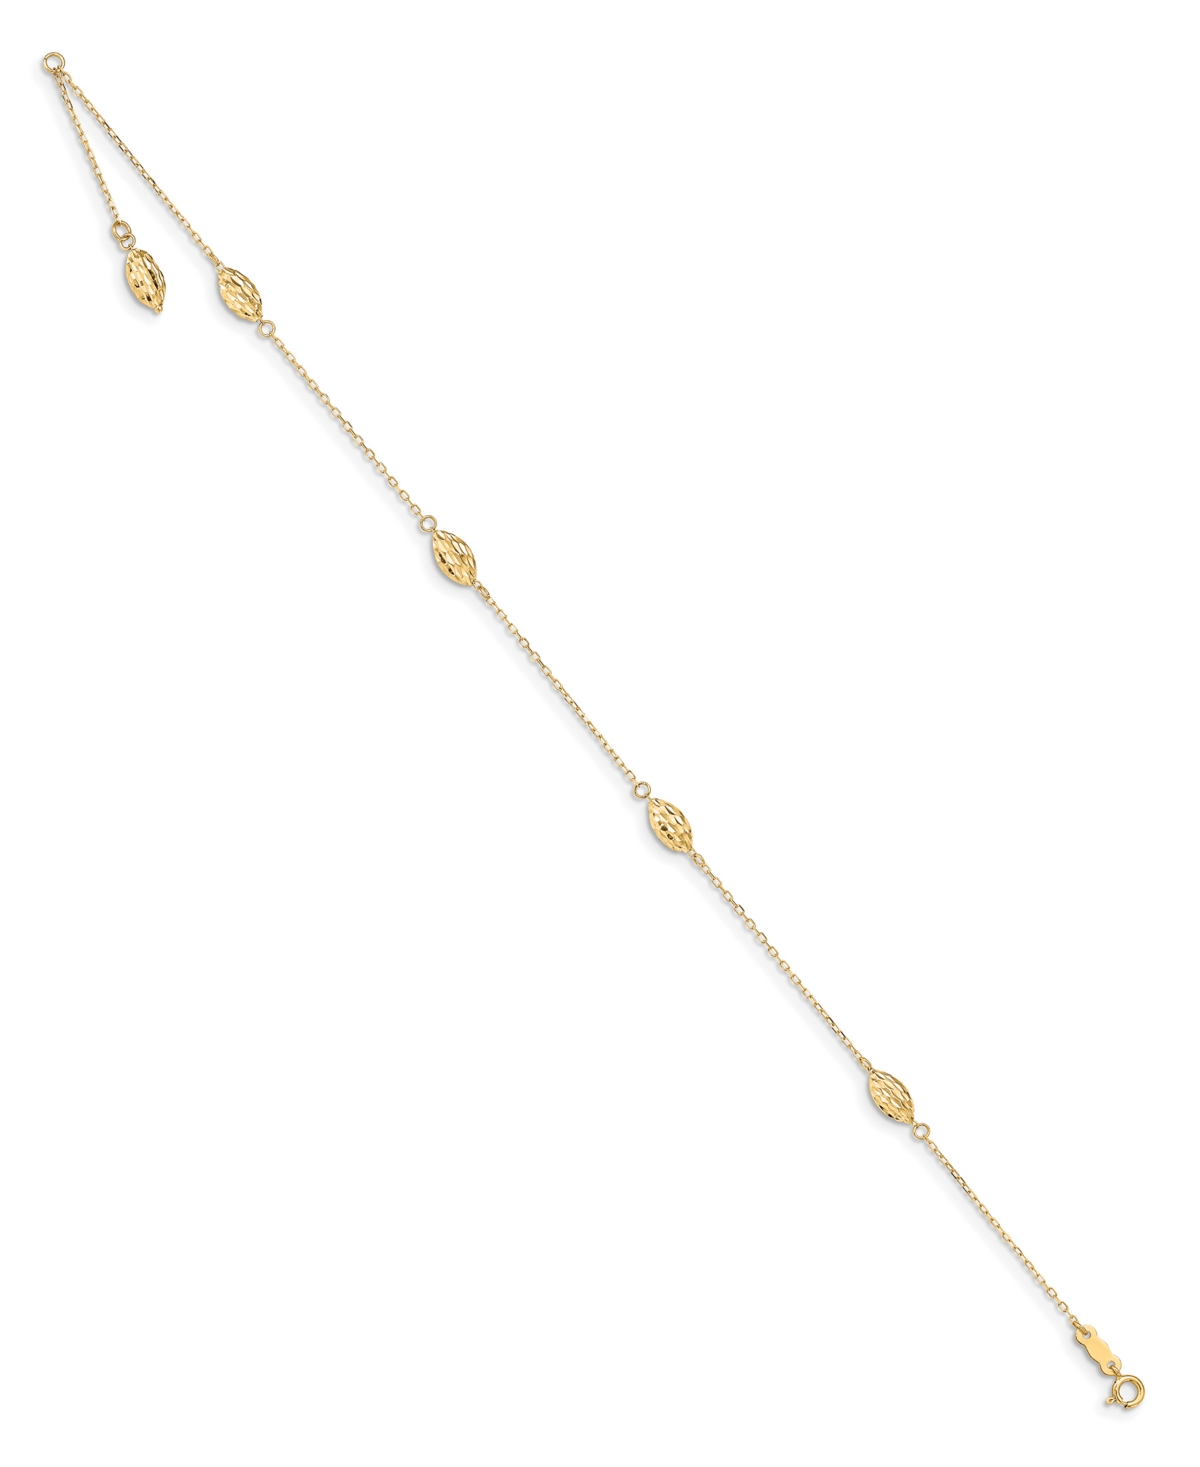 Rice Bead Anklet in 14k Yellow Gold - Gold